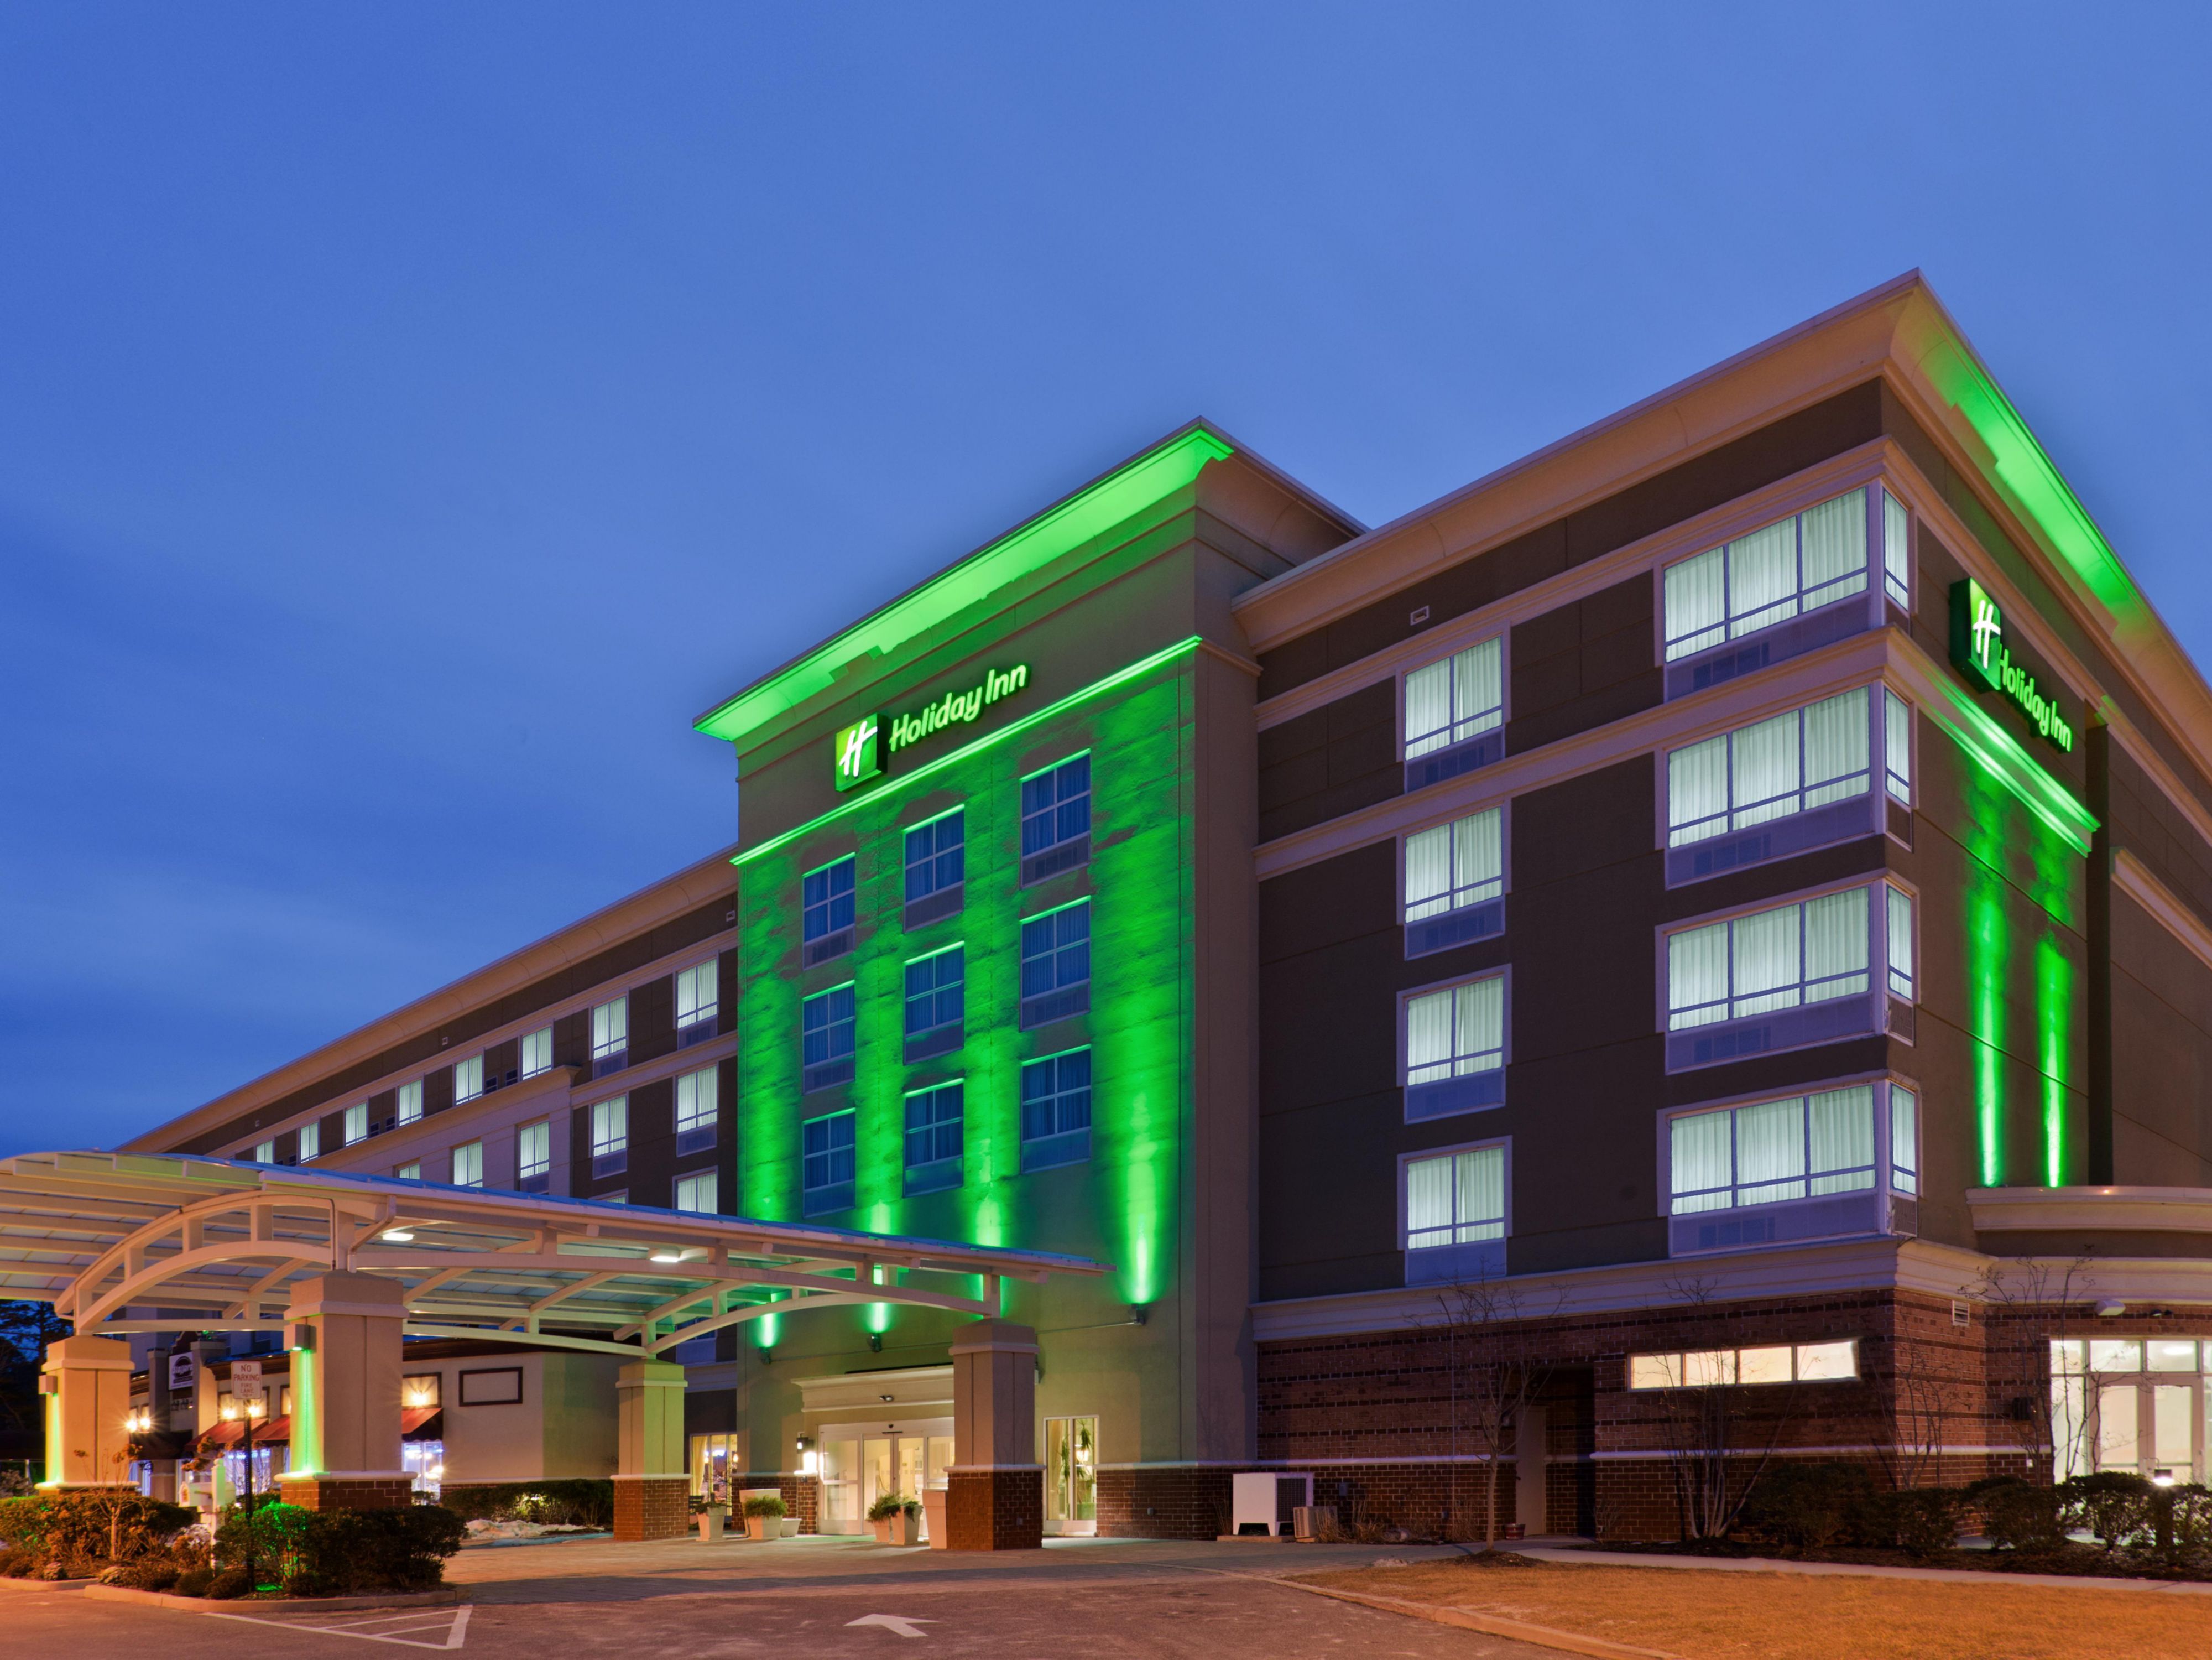 hilton hotels in new jersey close to nyc